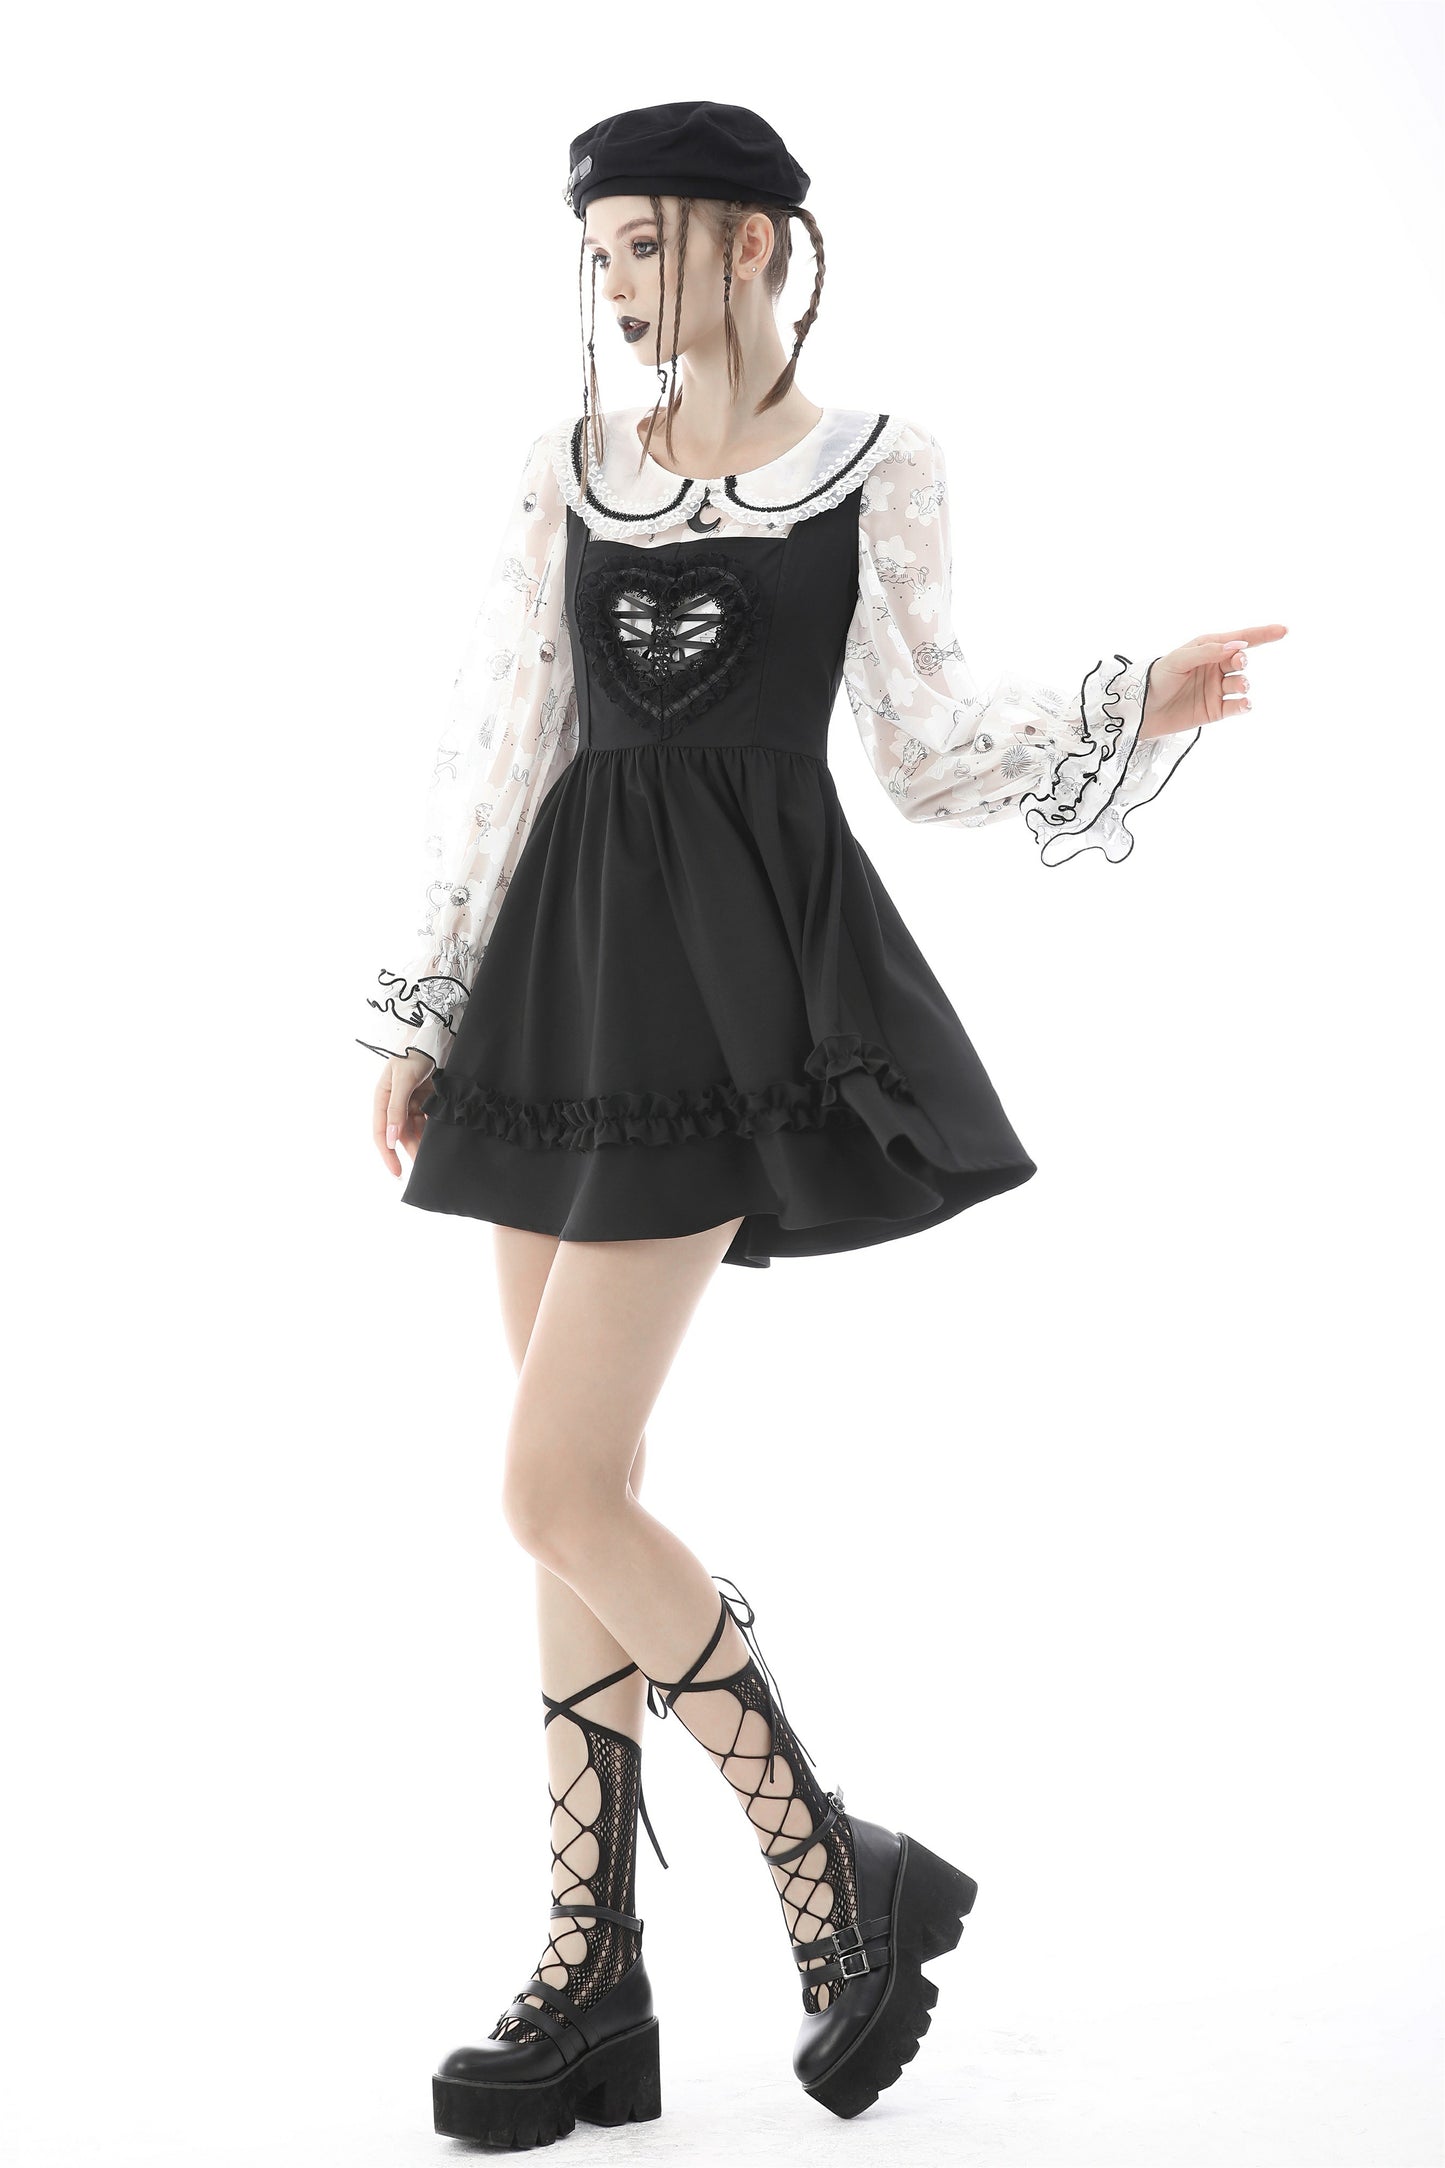 Give Me Your Heart Dolly Dress by Dark In Love